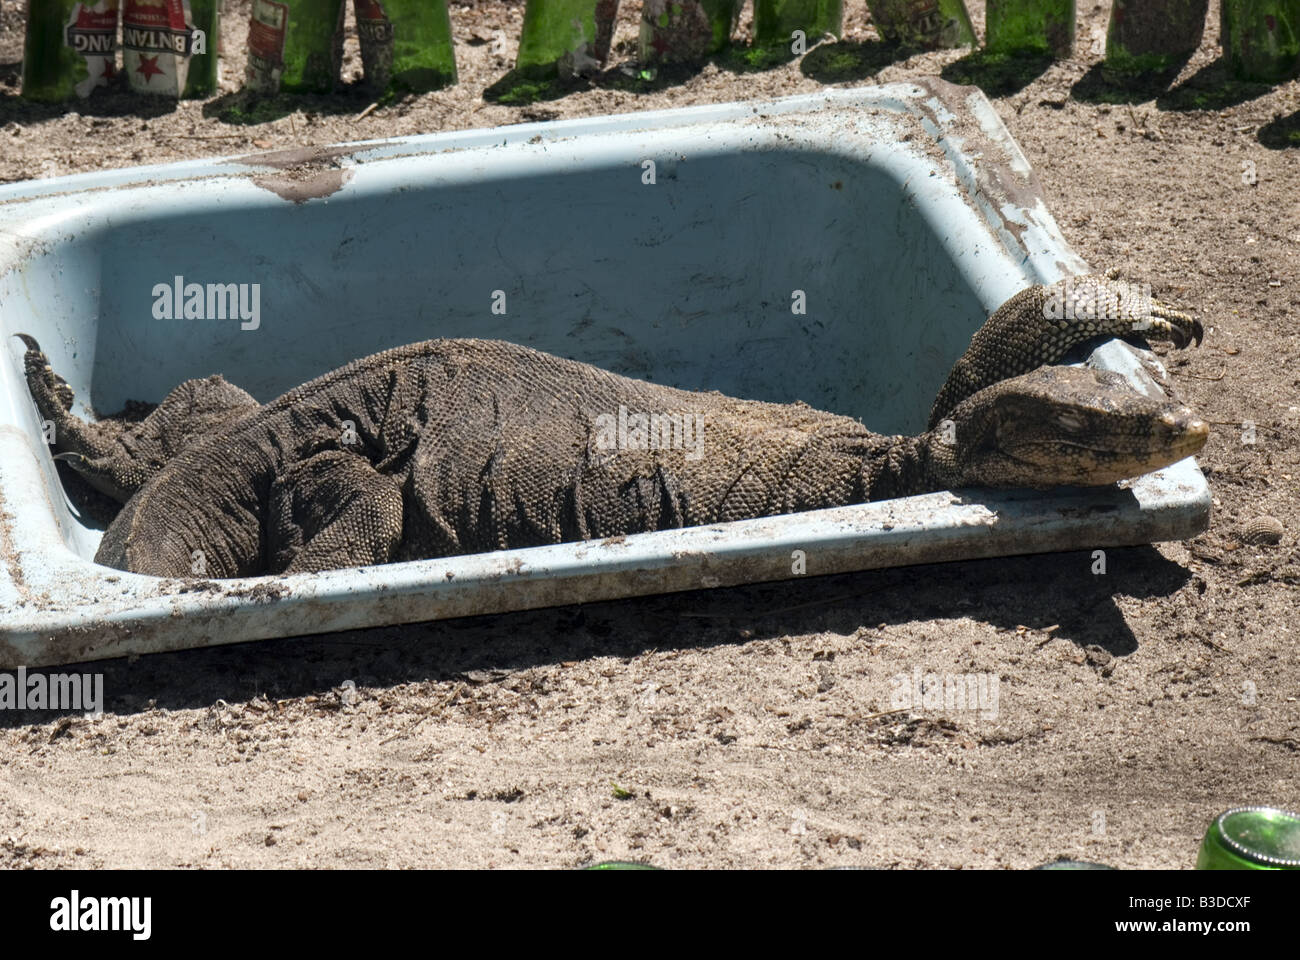 Monitor Lizard sitting in a tub to warm up in the sun Stock Photo